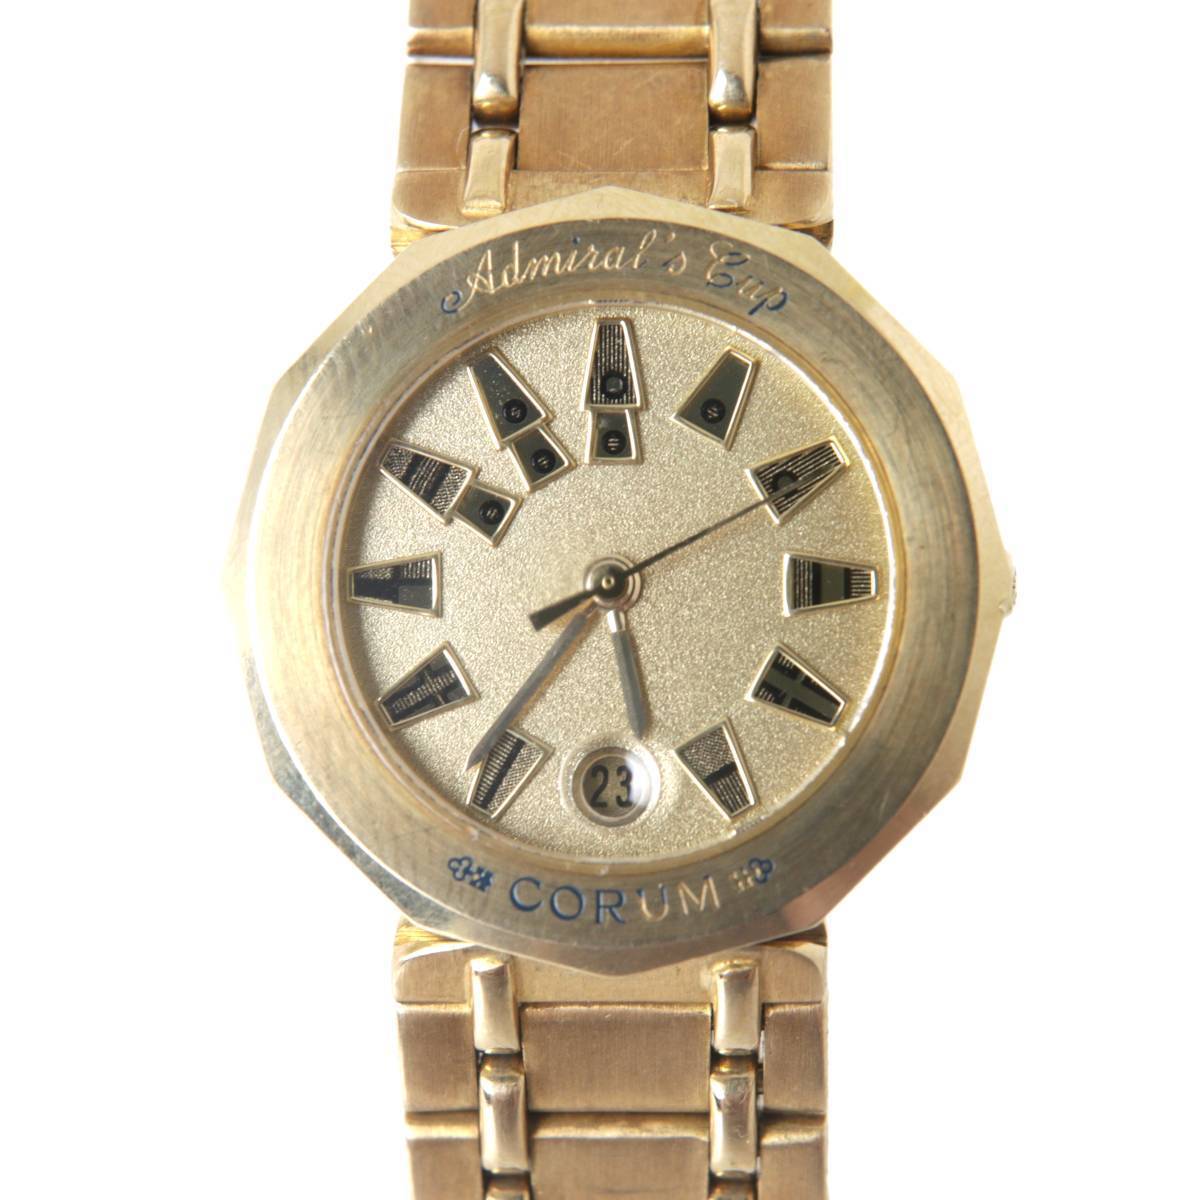 CORUM Corum Admiral z cup lady's quarts wristwatch pure gold K18YG 39.910.56V85 arm around approximately 15cm weight approximately 78.2g NT B rank 